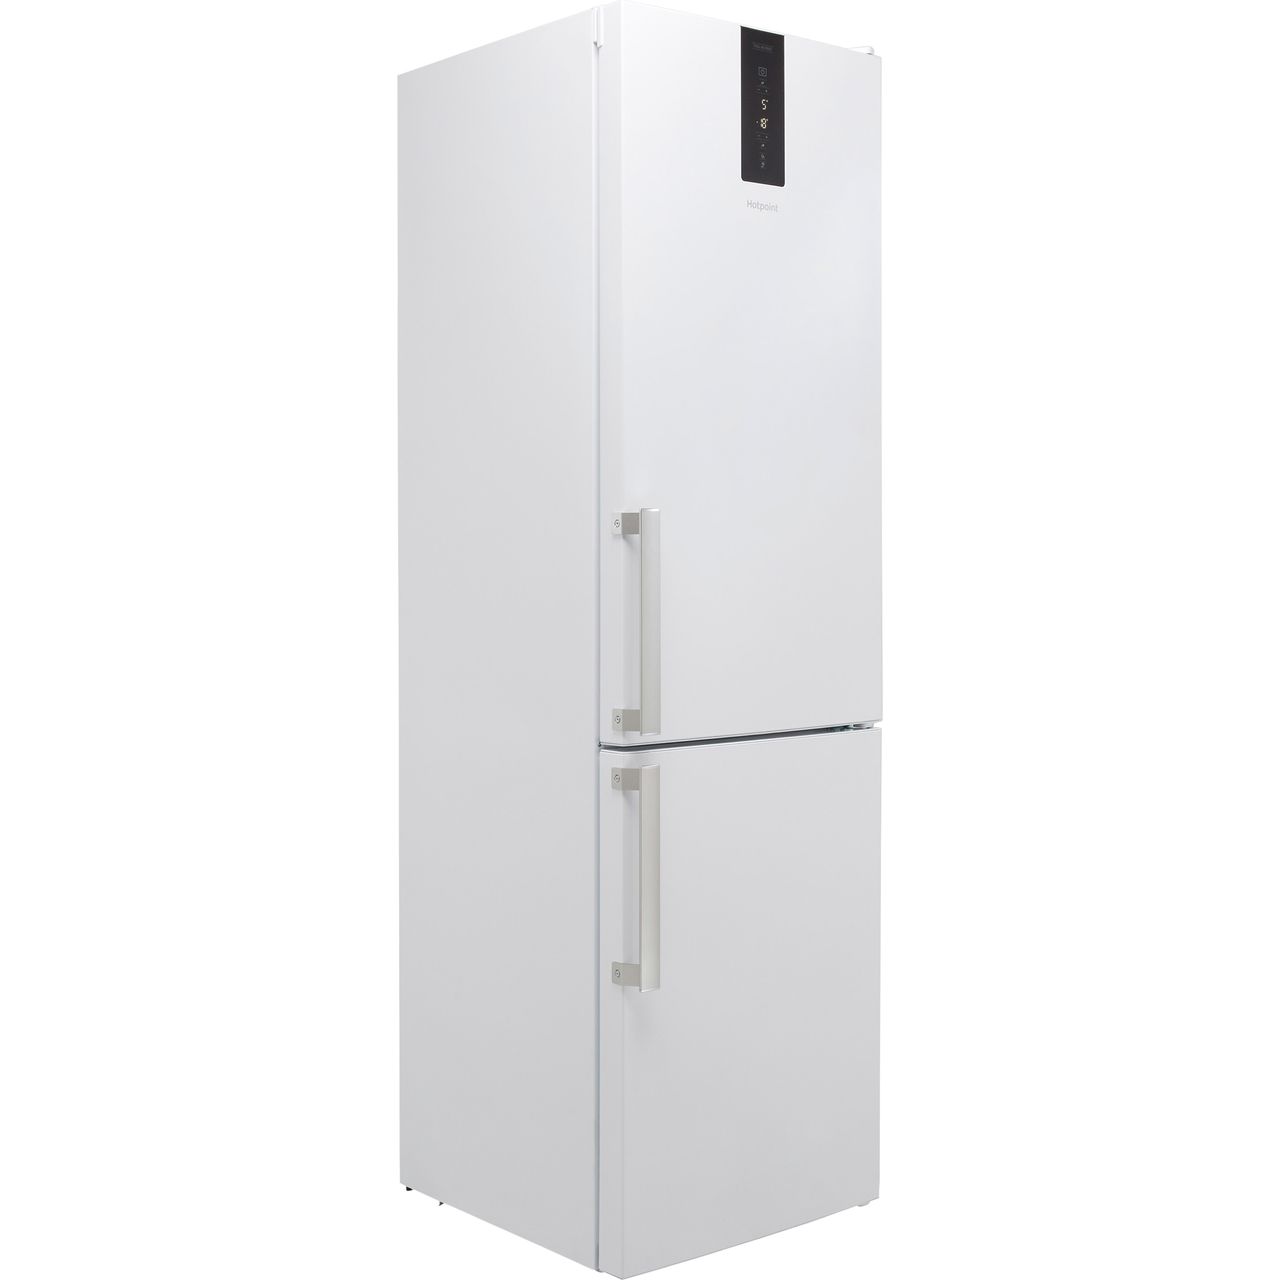 23+ Hotpoint fridge on but not cold ideas in 2021 